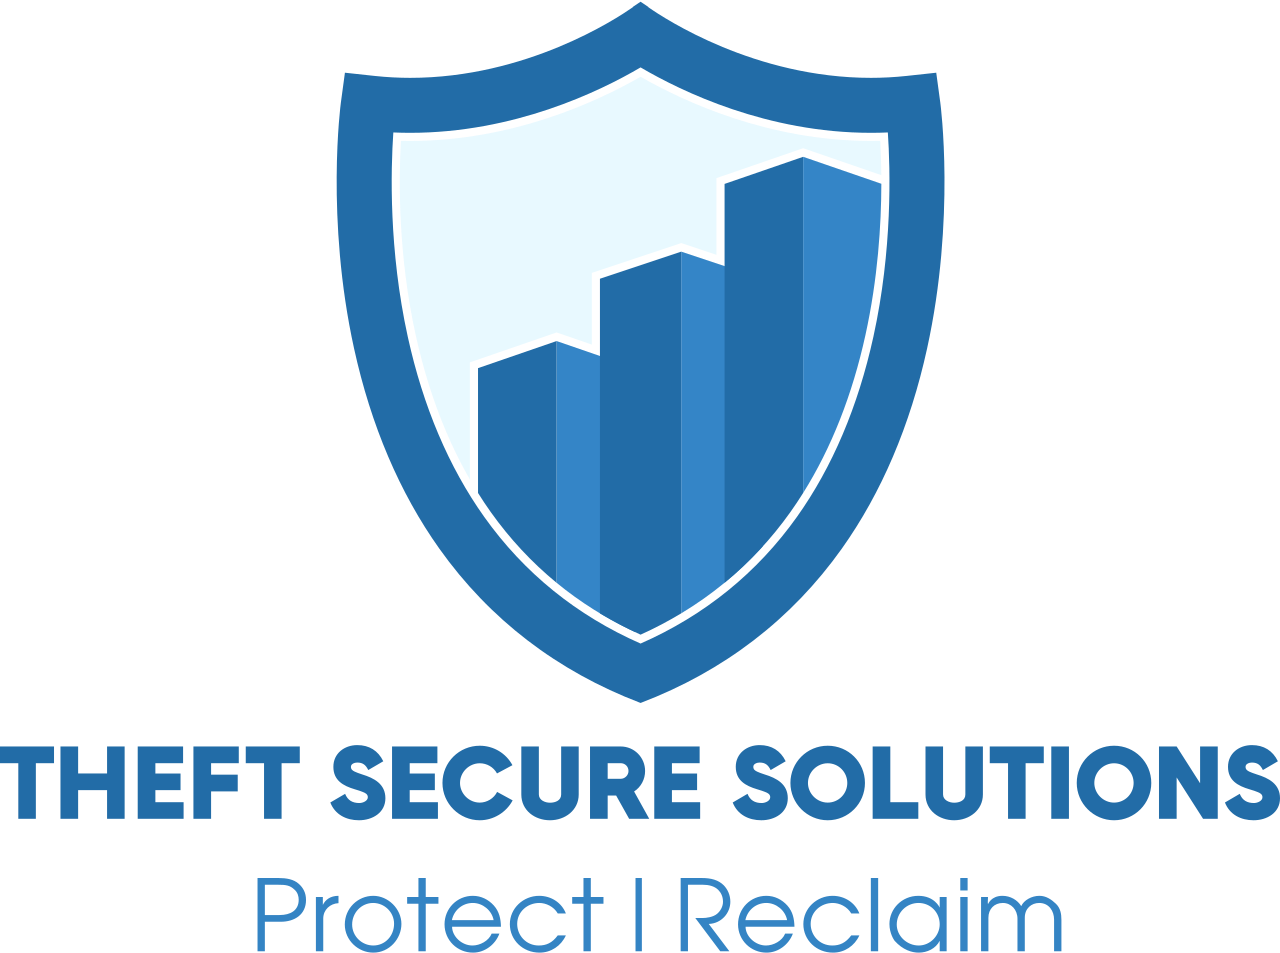 Theft Secure Solutions's web page